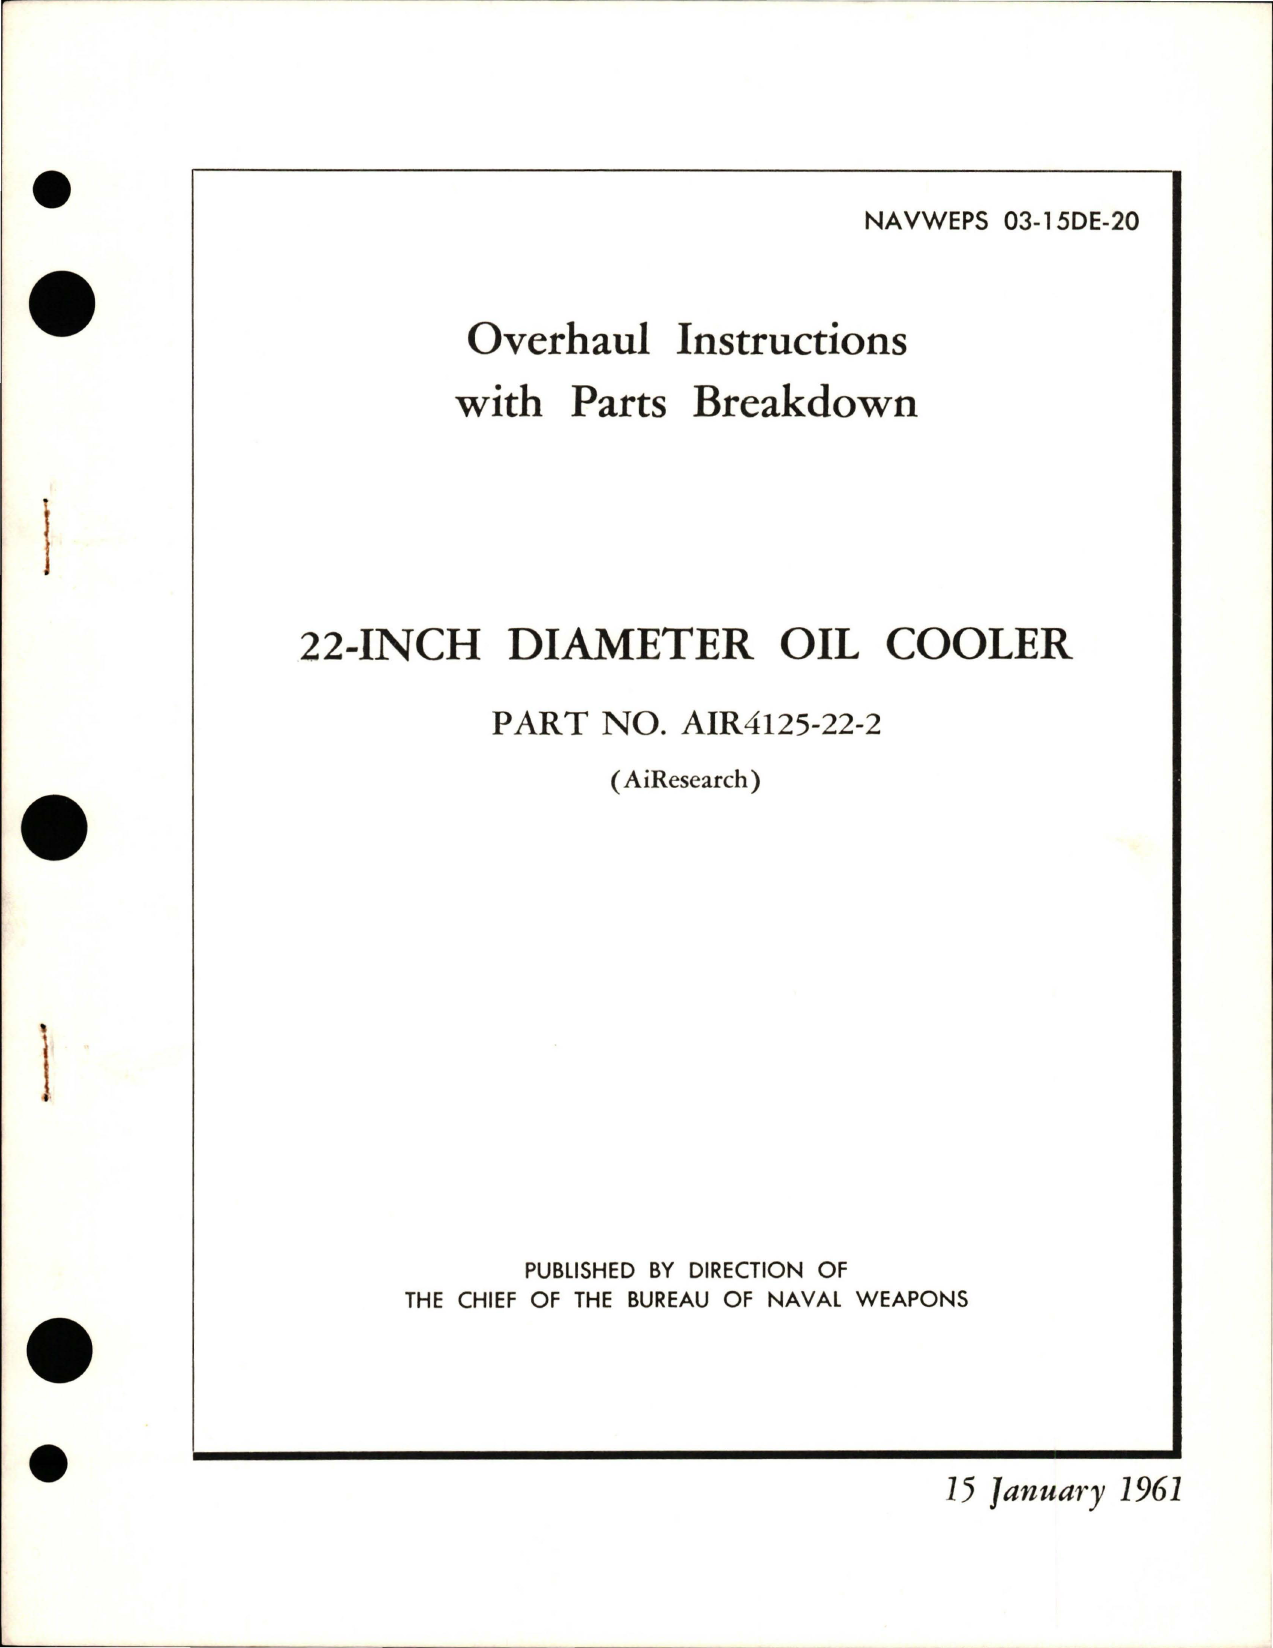 Sample page 1 from AirCorps Library document: Overhaul Instructions with Parts Breakdown for Oil Cooler - 22 Inch Diameter - Part AIR4125-22-2